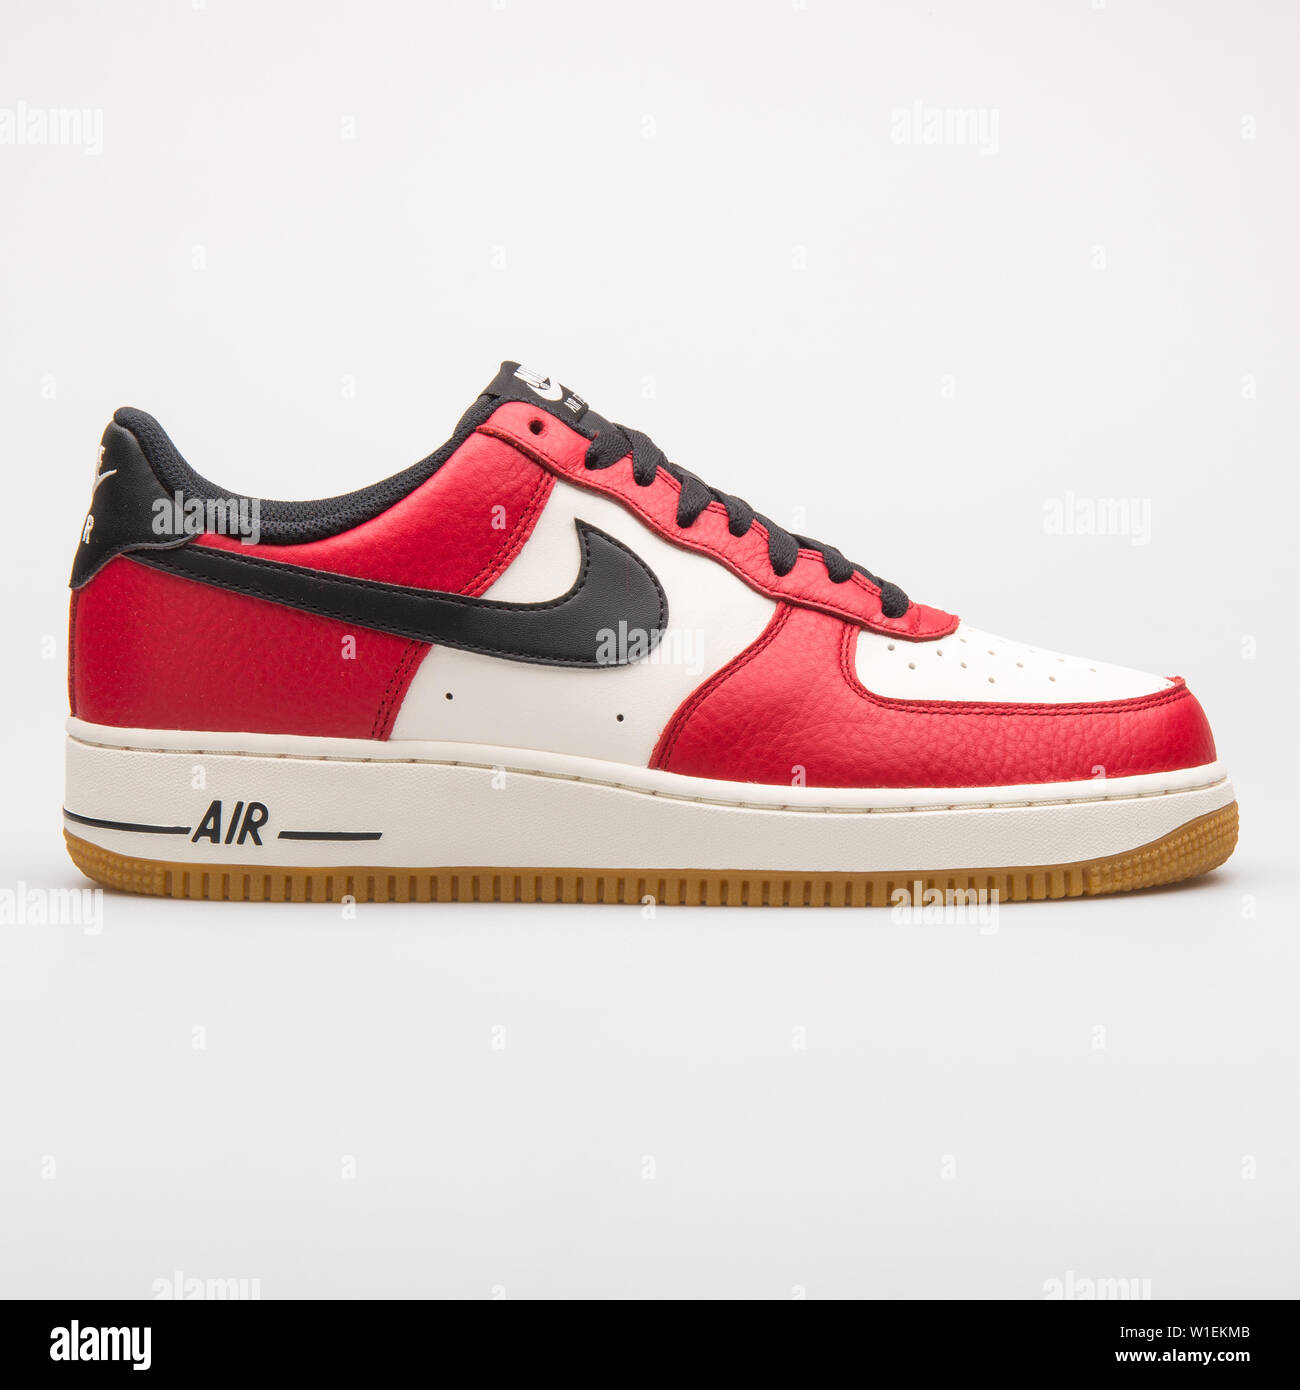 VIENNA, AUSTRIA - AUGUST 28, 2017: Nike Air Force 1 red, black and white  sneaker on white background Stock Photo - Alamy